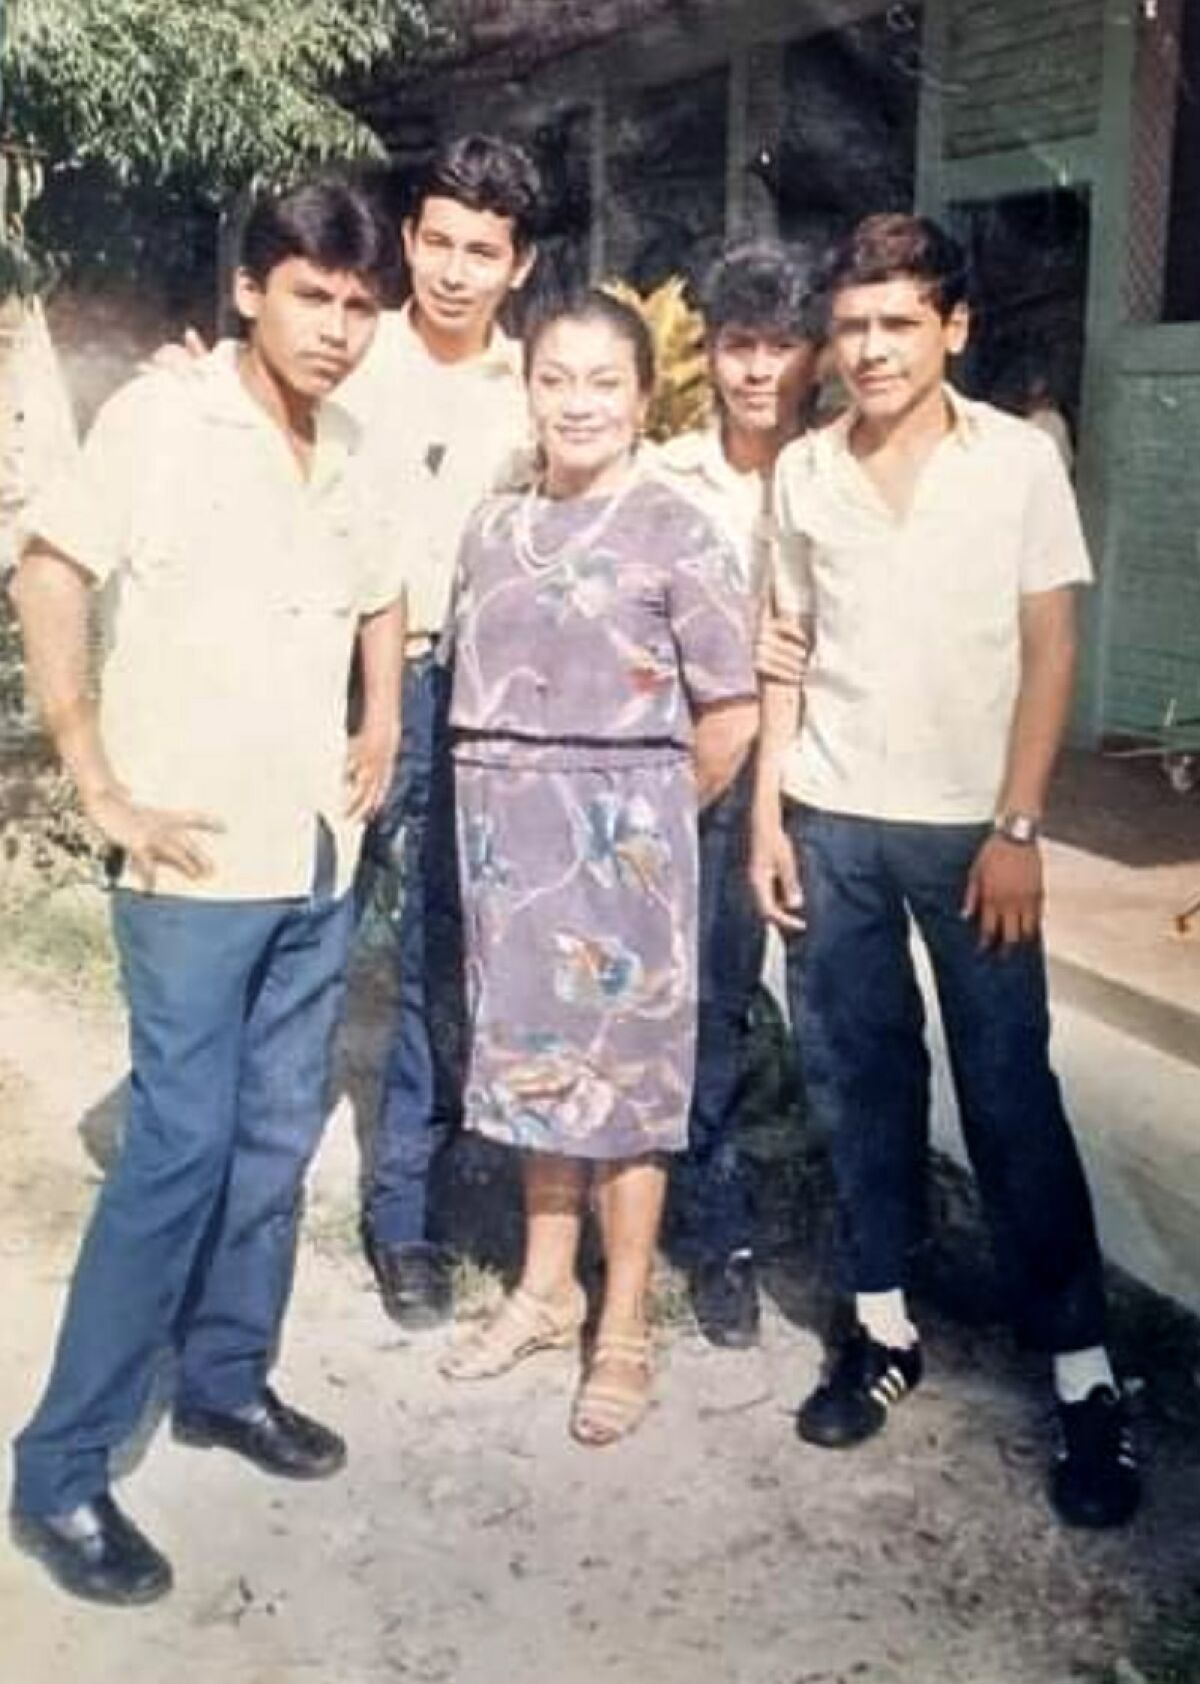 Jose Tomas Mejia, pictured on the far left, after he graduated from high school in El Salvador.